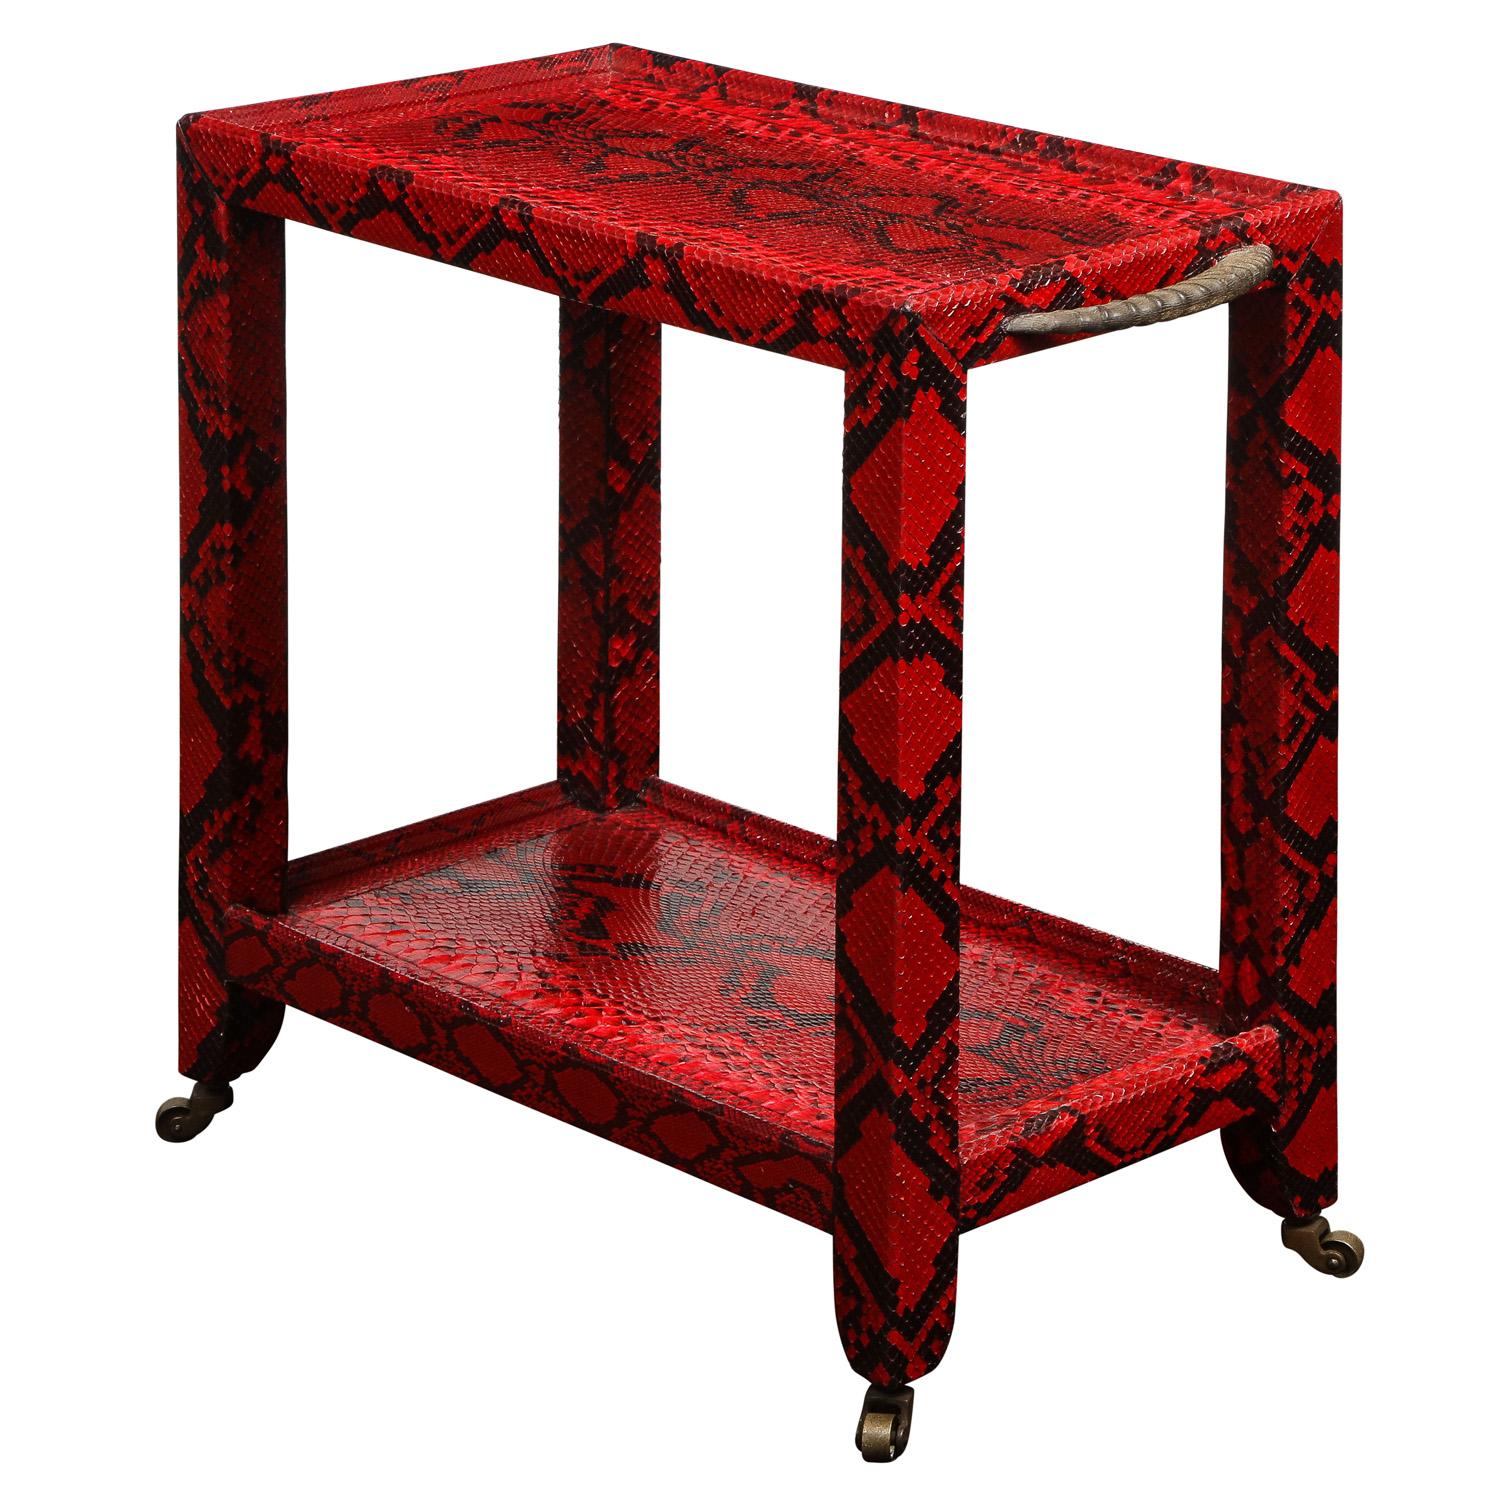 Unique 2-tier side table in red python with authentic horn handles with small brass castors by Karl Springer, American 1977 (label on bottom reads “Karl Springer 1977”). Fine materials and craftsmanship are the hallmarks of Karl Springer’s designs. 